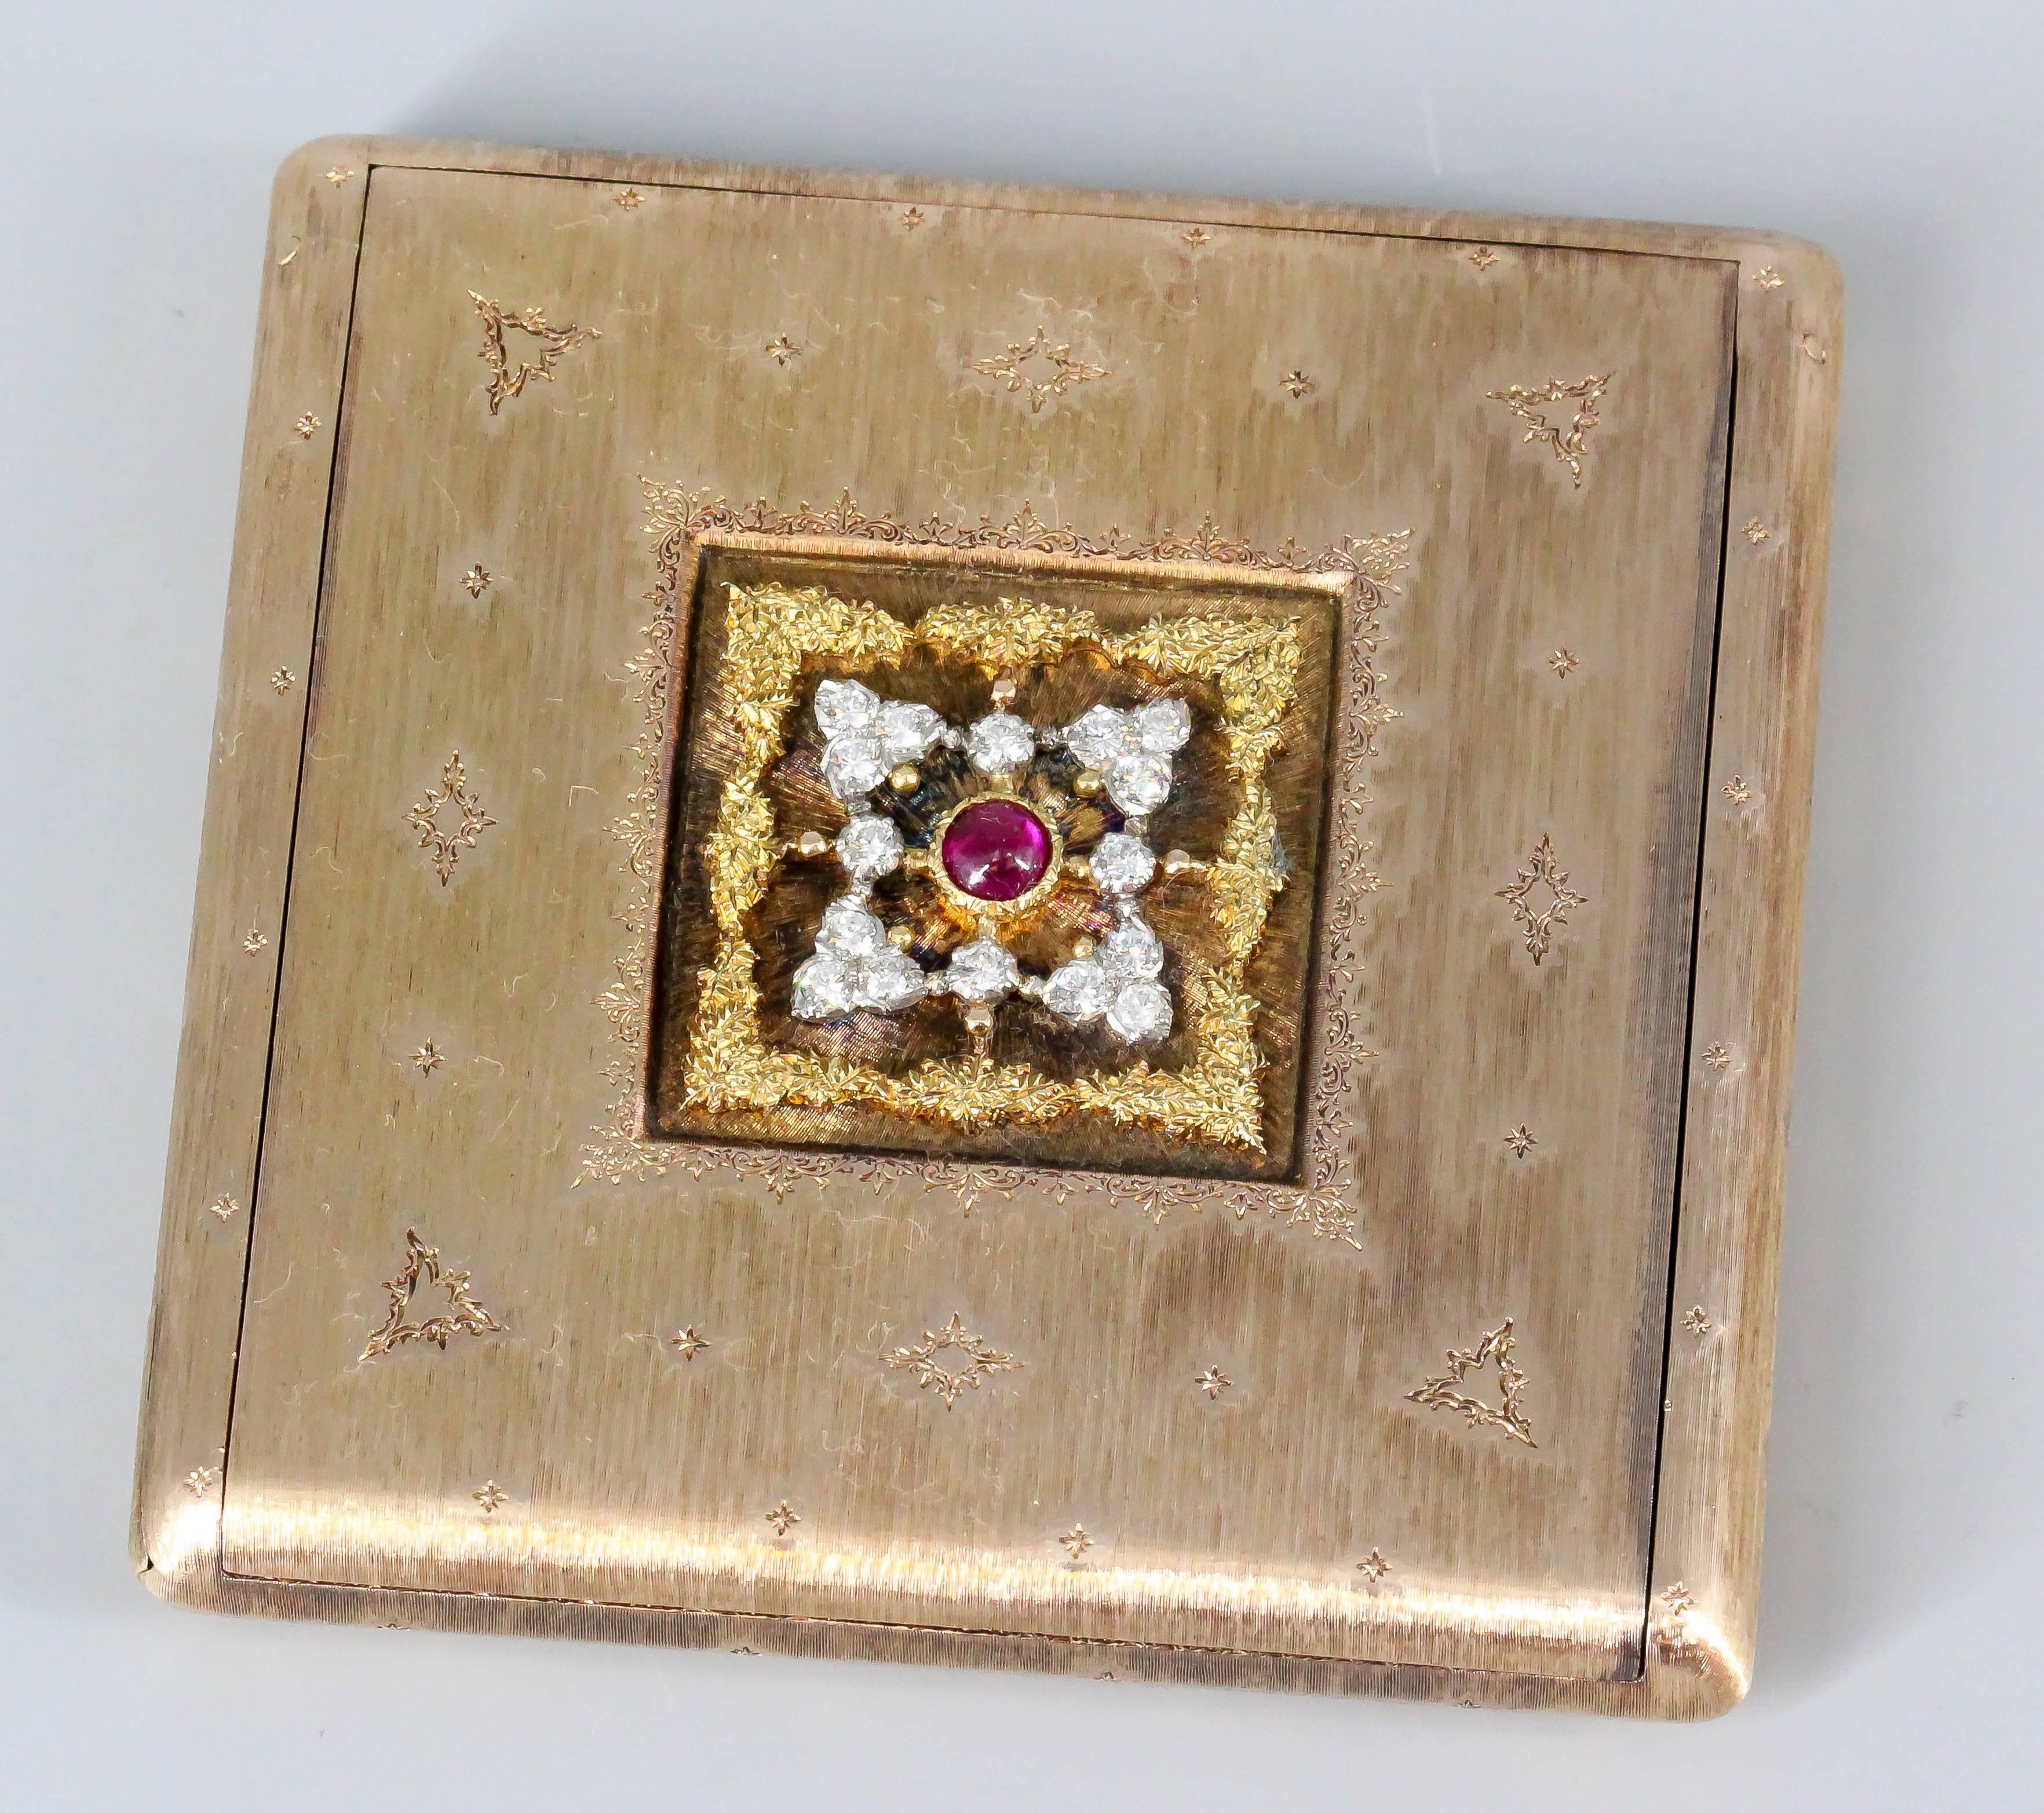 Rare and unusual sapphire, diamond, and 18K rose gold compact by Buccellati, circa 1930s. It features a deep red cabochon ruby in the middle, with high grade round brilliant cut diamonds around it. The case itself is made with 18K rose gold in